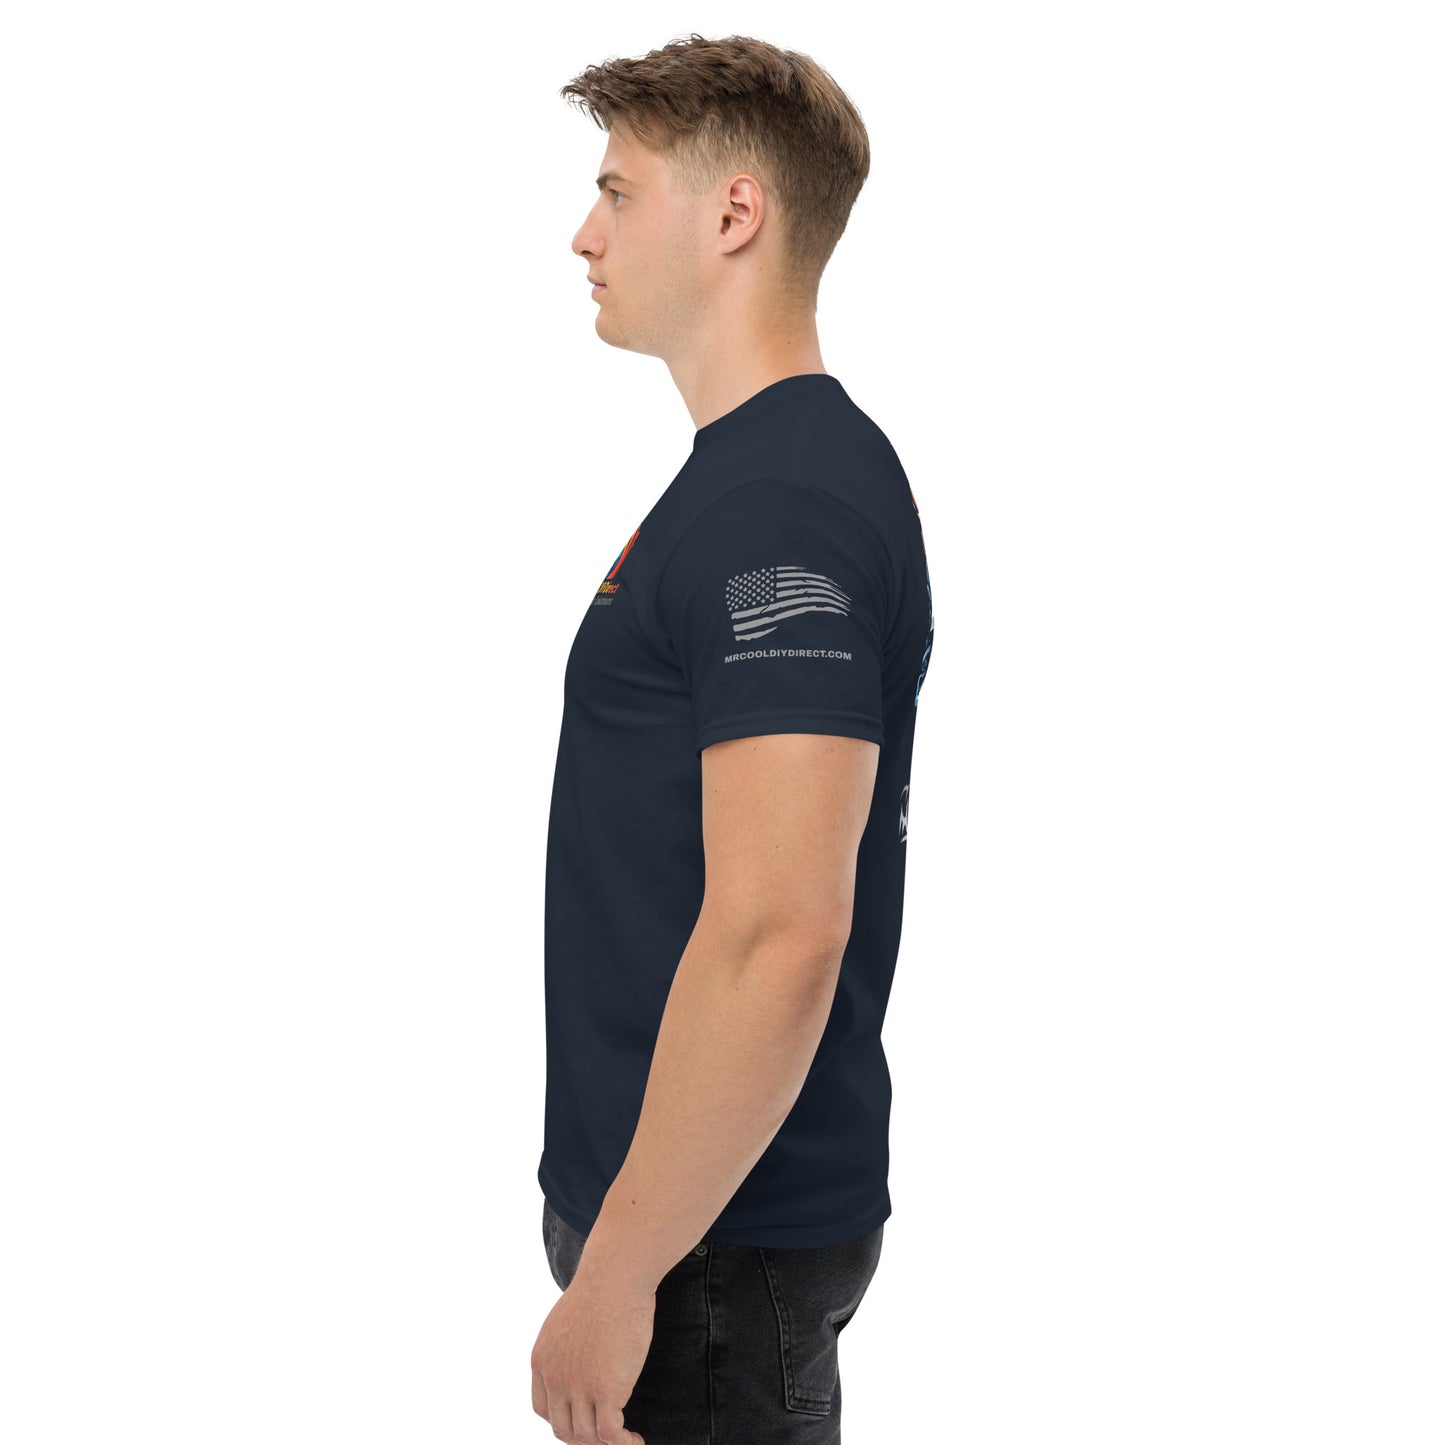 A young man in a navy blue t-shirt, profile view, with Exclusive HVAC-Themed Custom Tees by MRCOOL DIY Direct and text on the sleeve, standing against a white background.